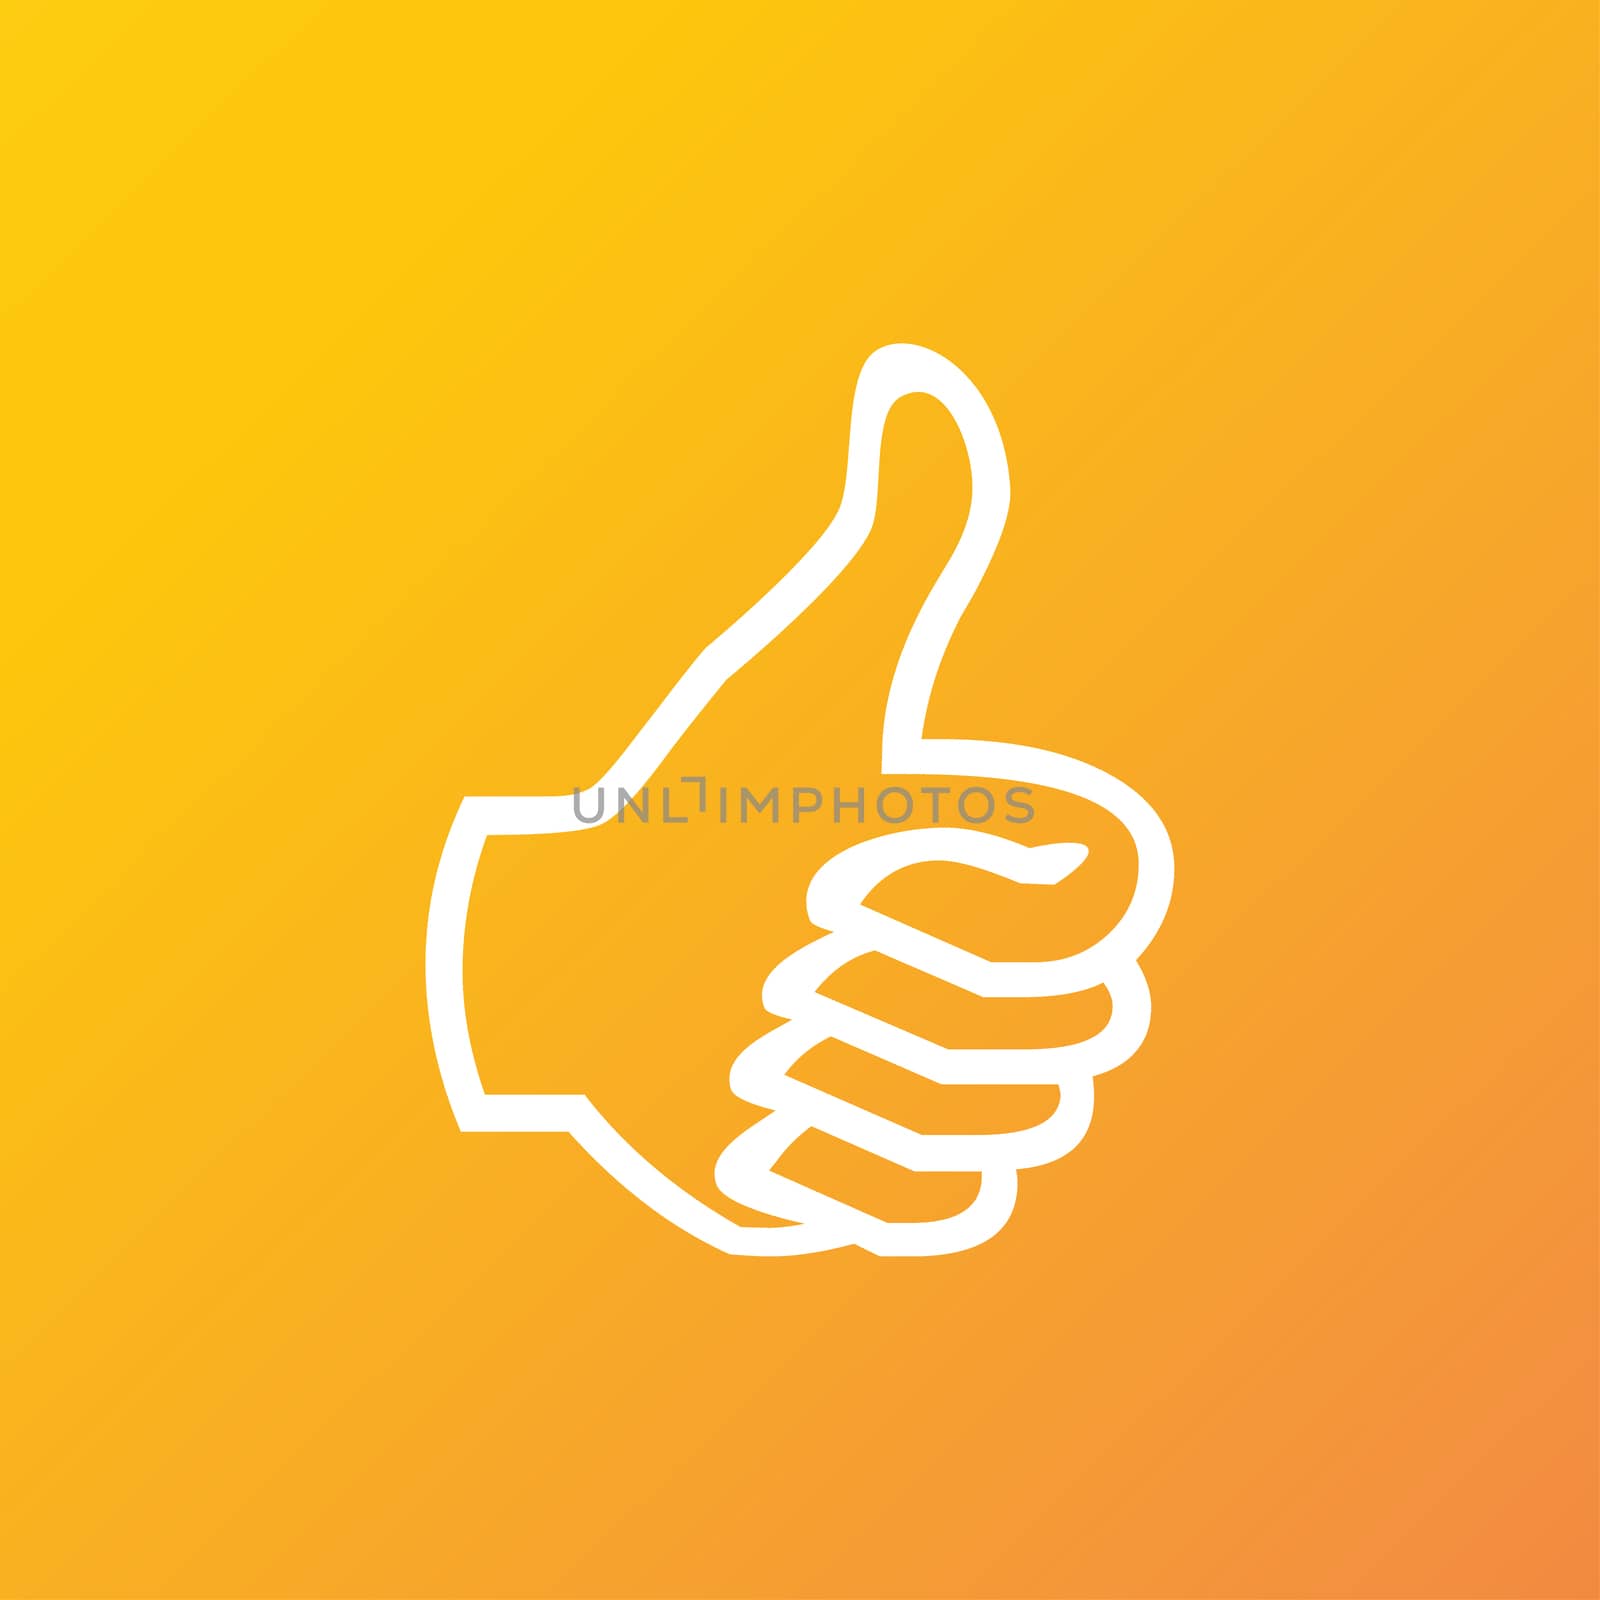 Thumb up icon symbol Flat modern web design with long shadow and space for your text. illustration